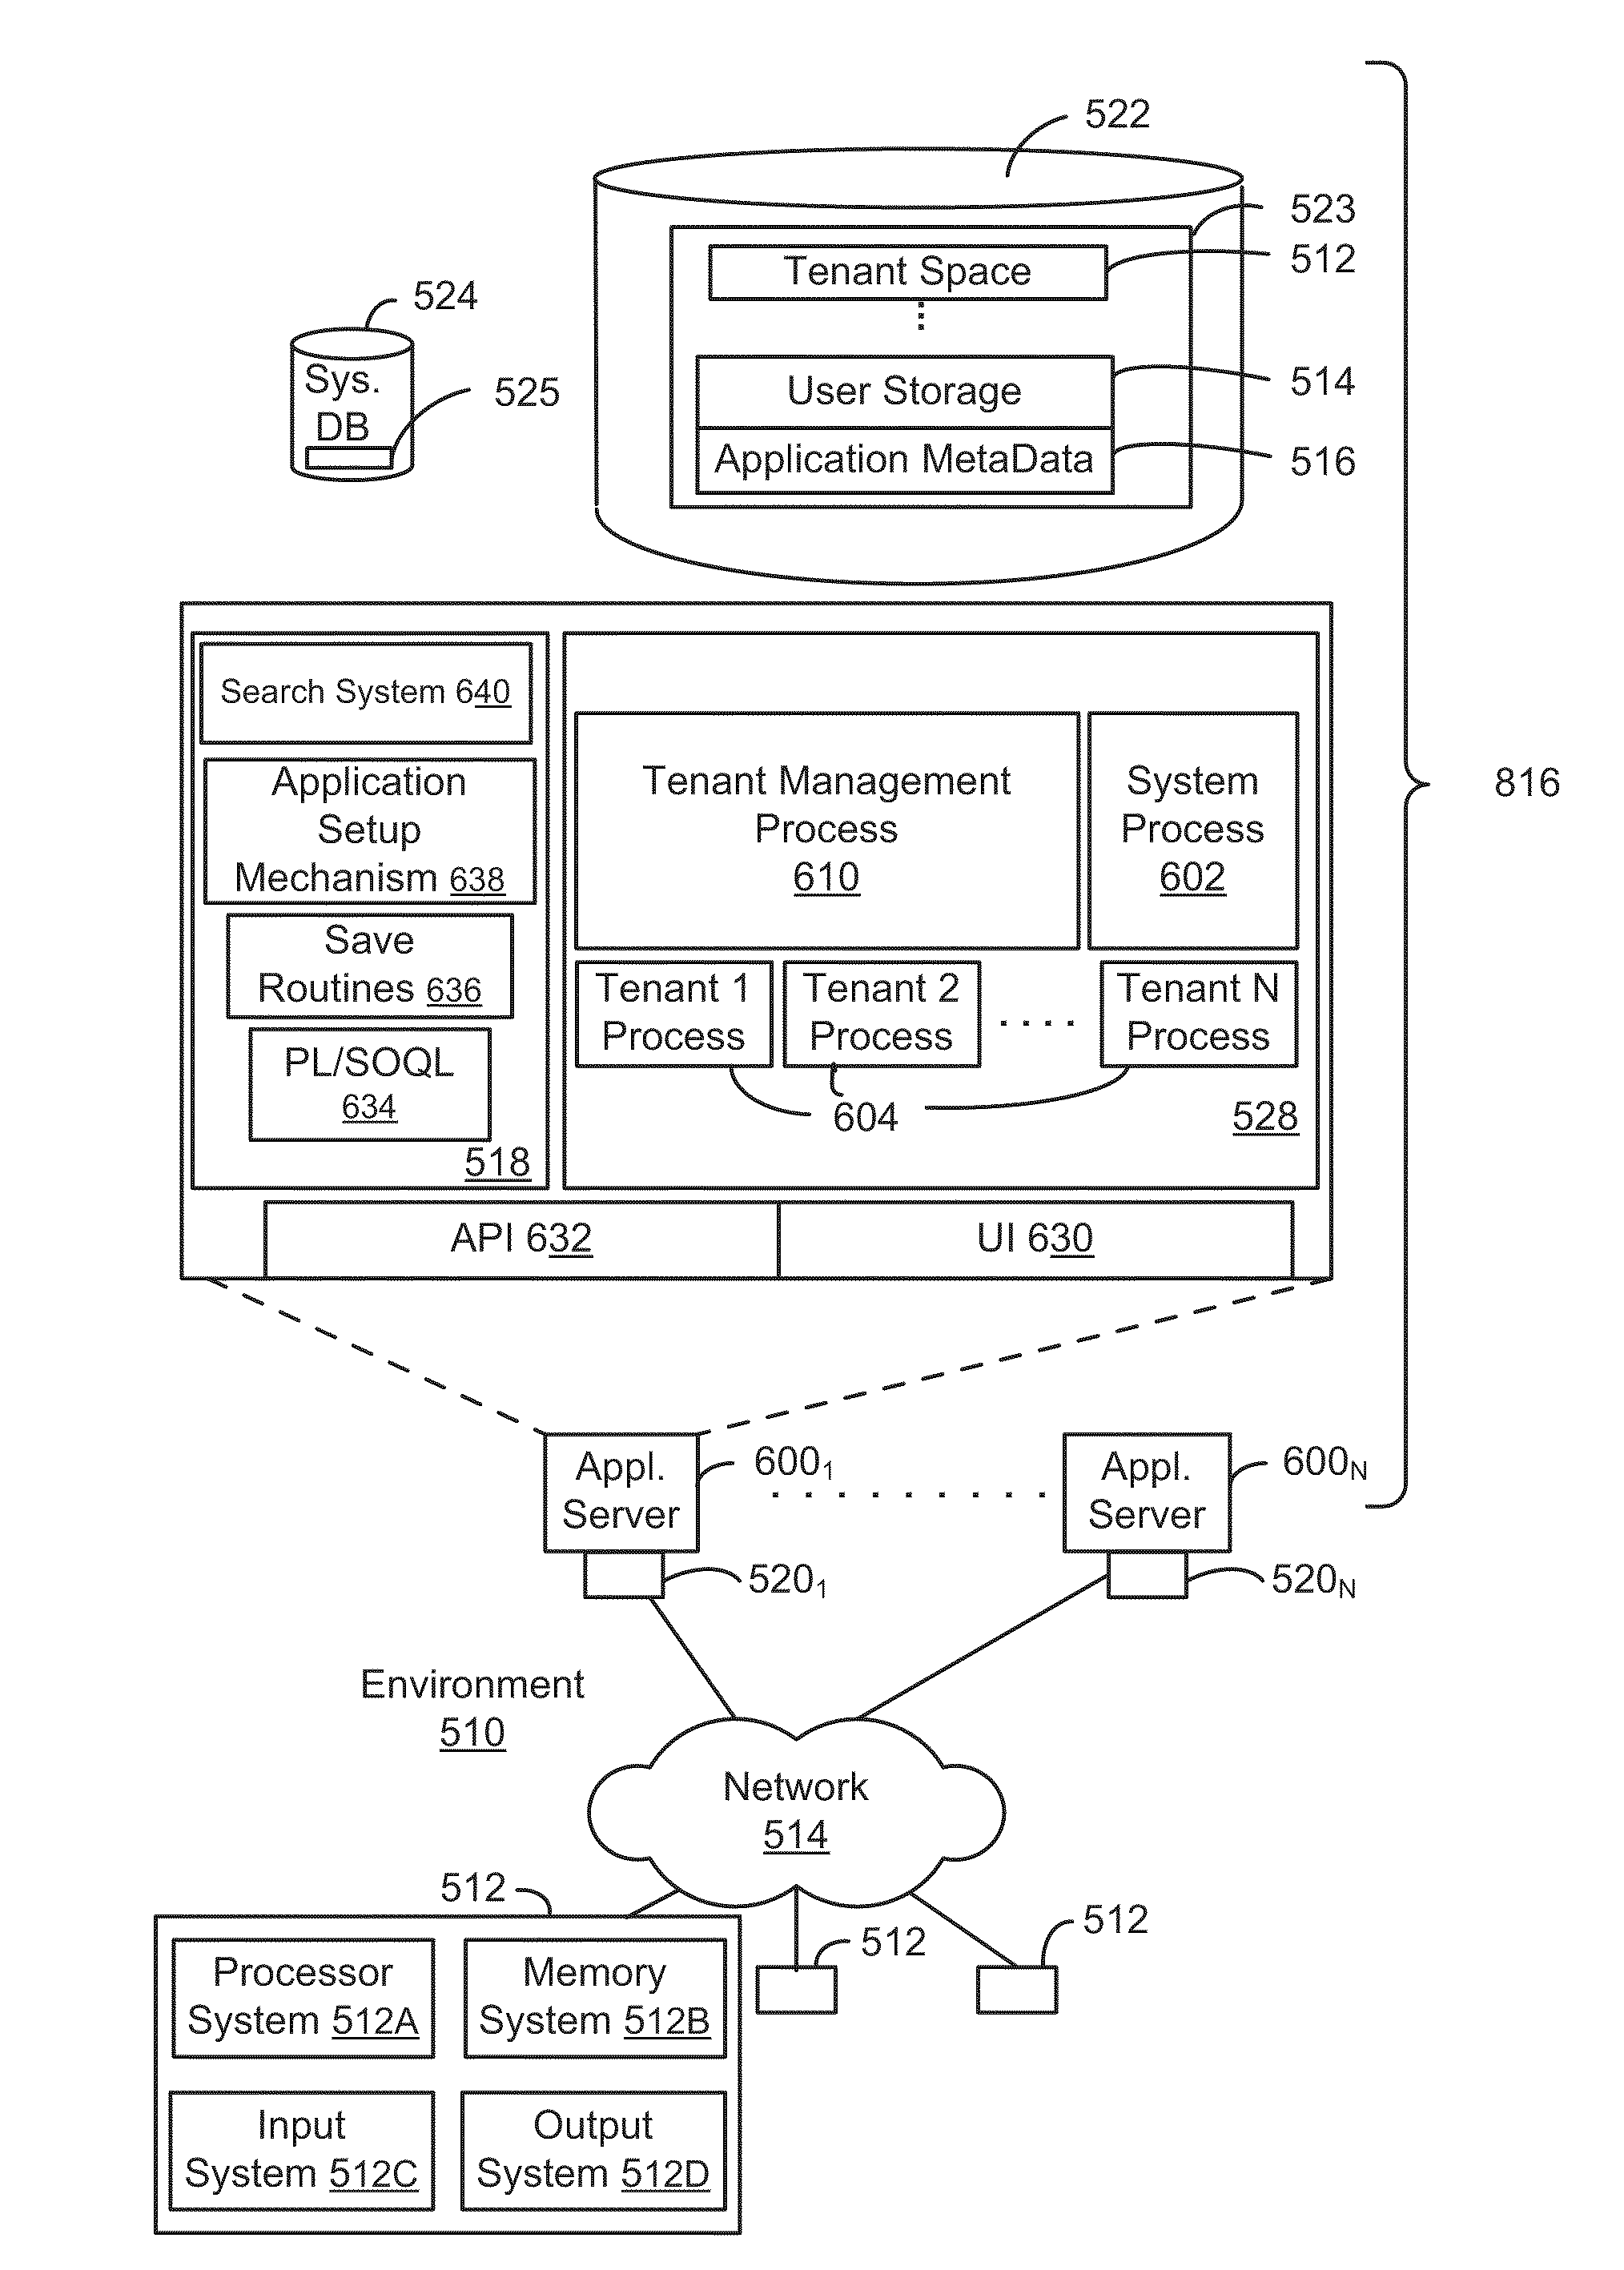 System, method and computer program product for determining an amount of access to data, based on a role